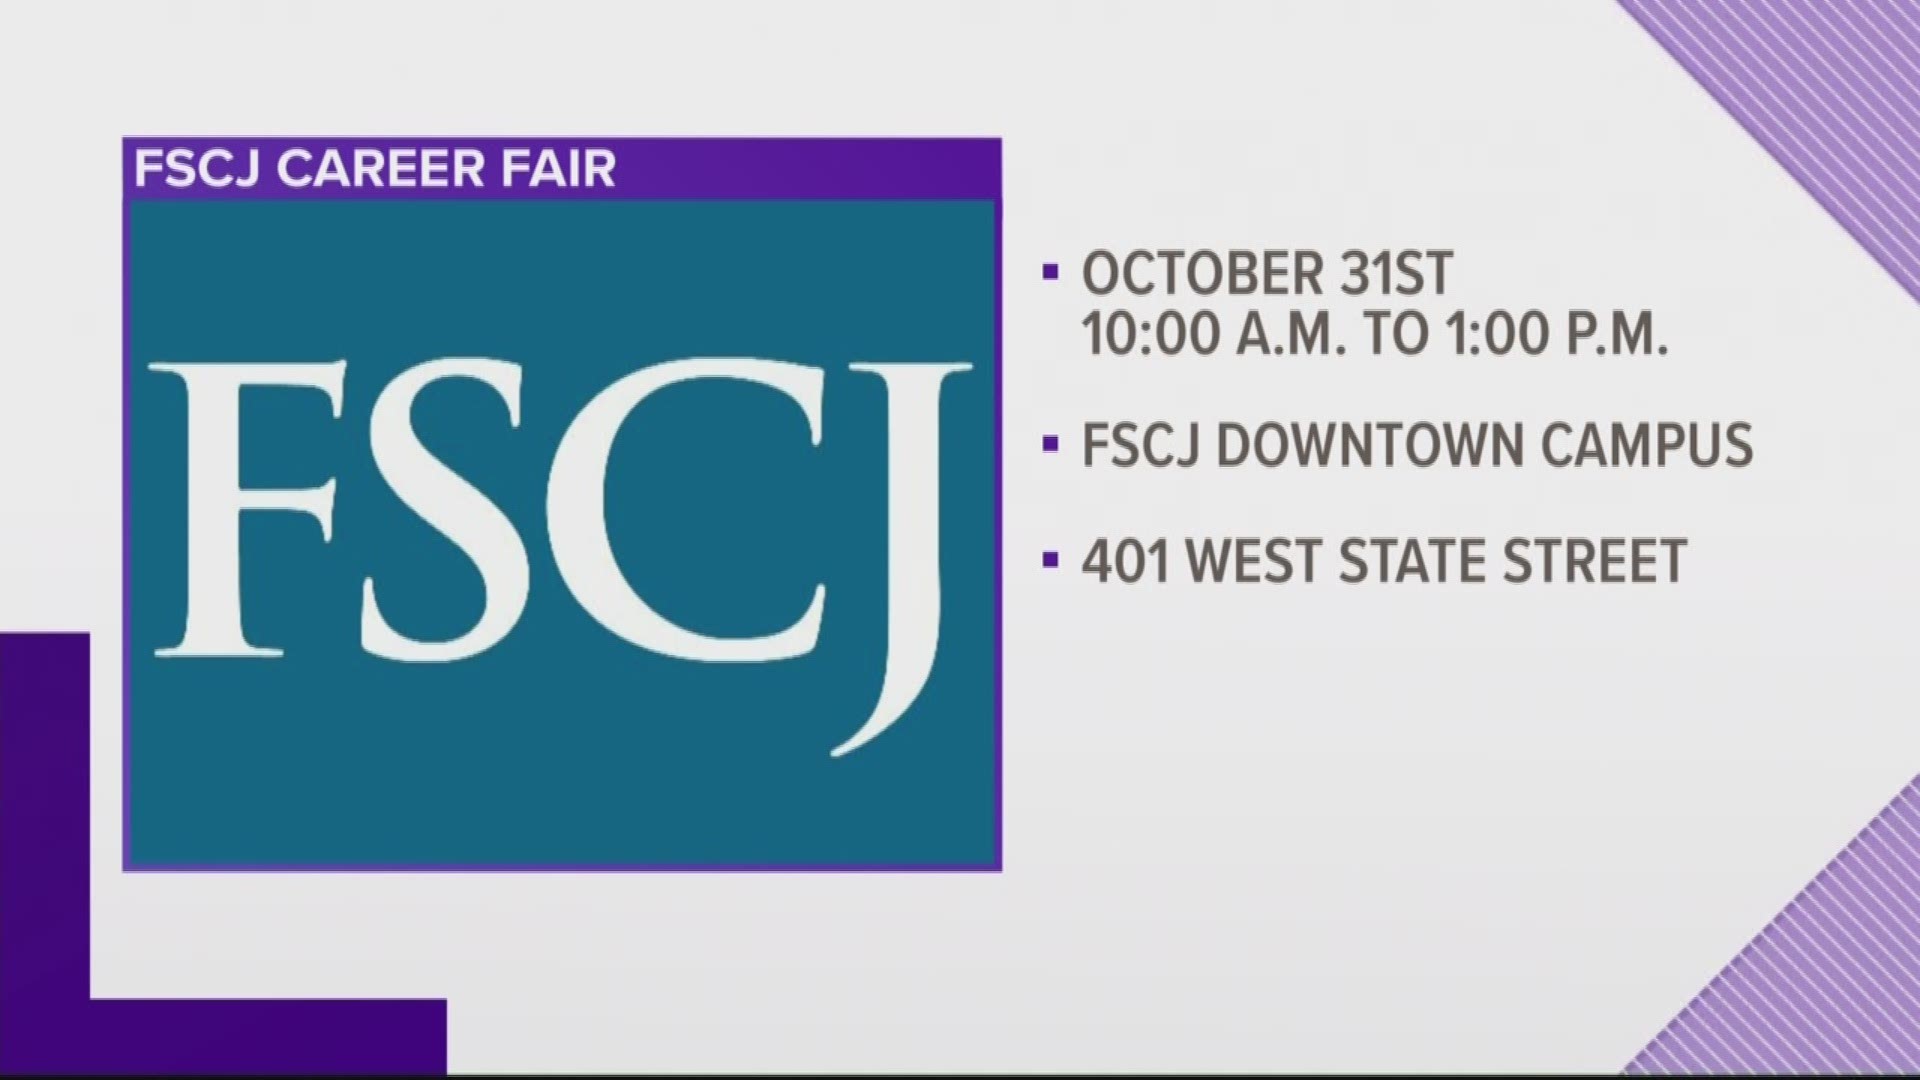 The free career fair will be at the Advanced Technology Center at FSCJ's Downtown Campus on Oct. 31 from 10 a.m. to 1 p.m.